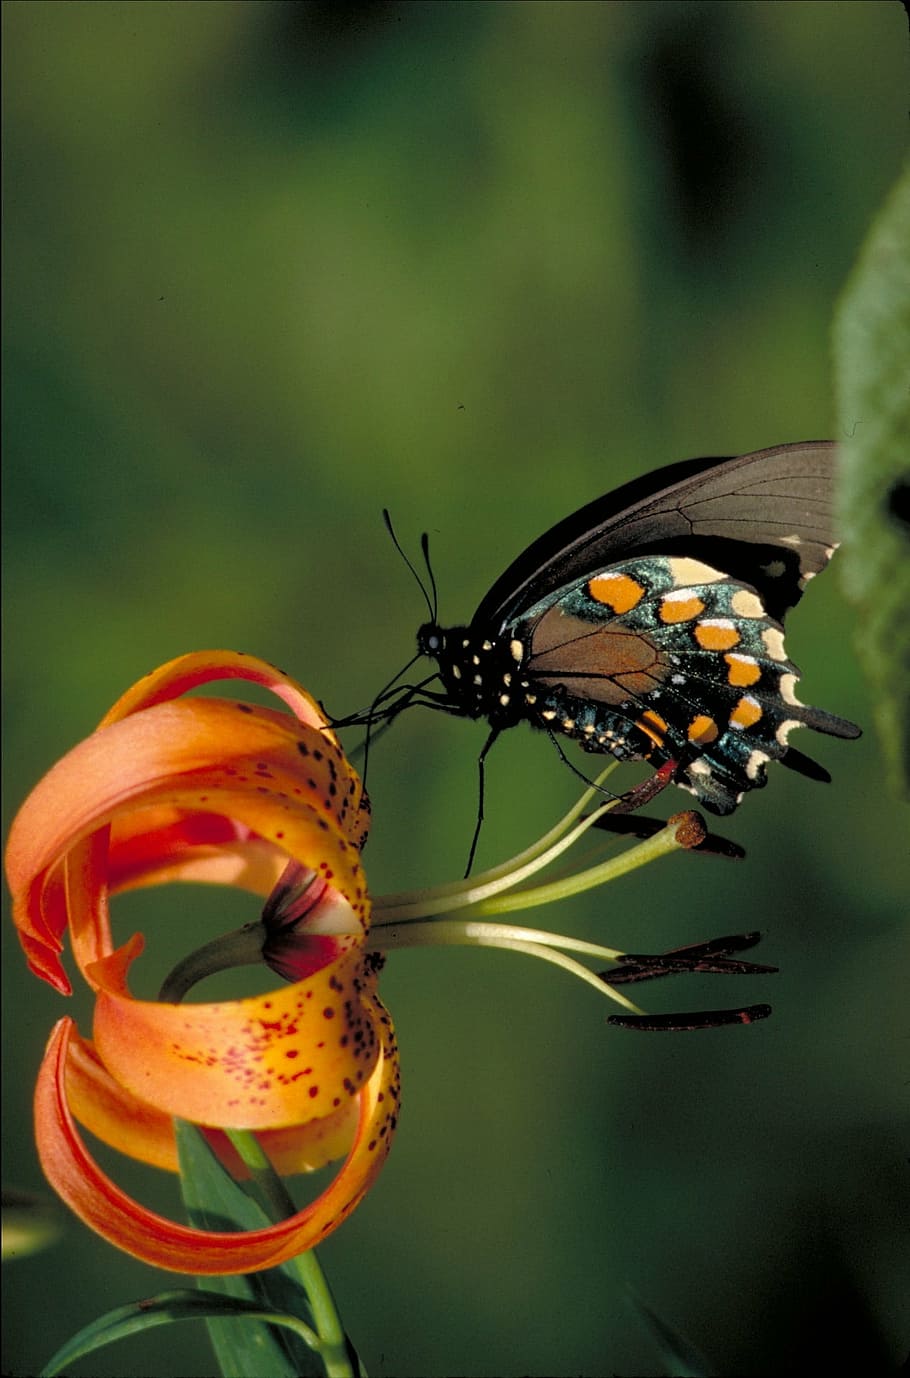 pipevine swallowtail butterfly, insect, turks cap lily, flower